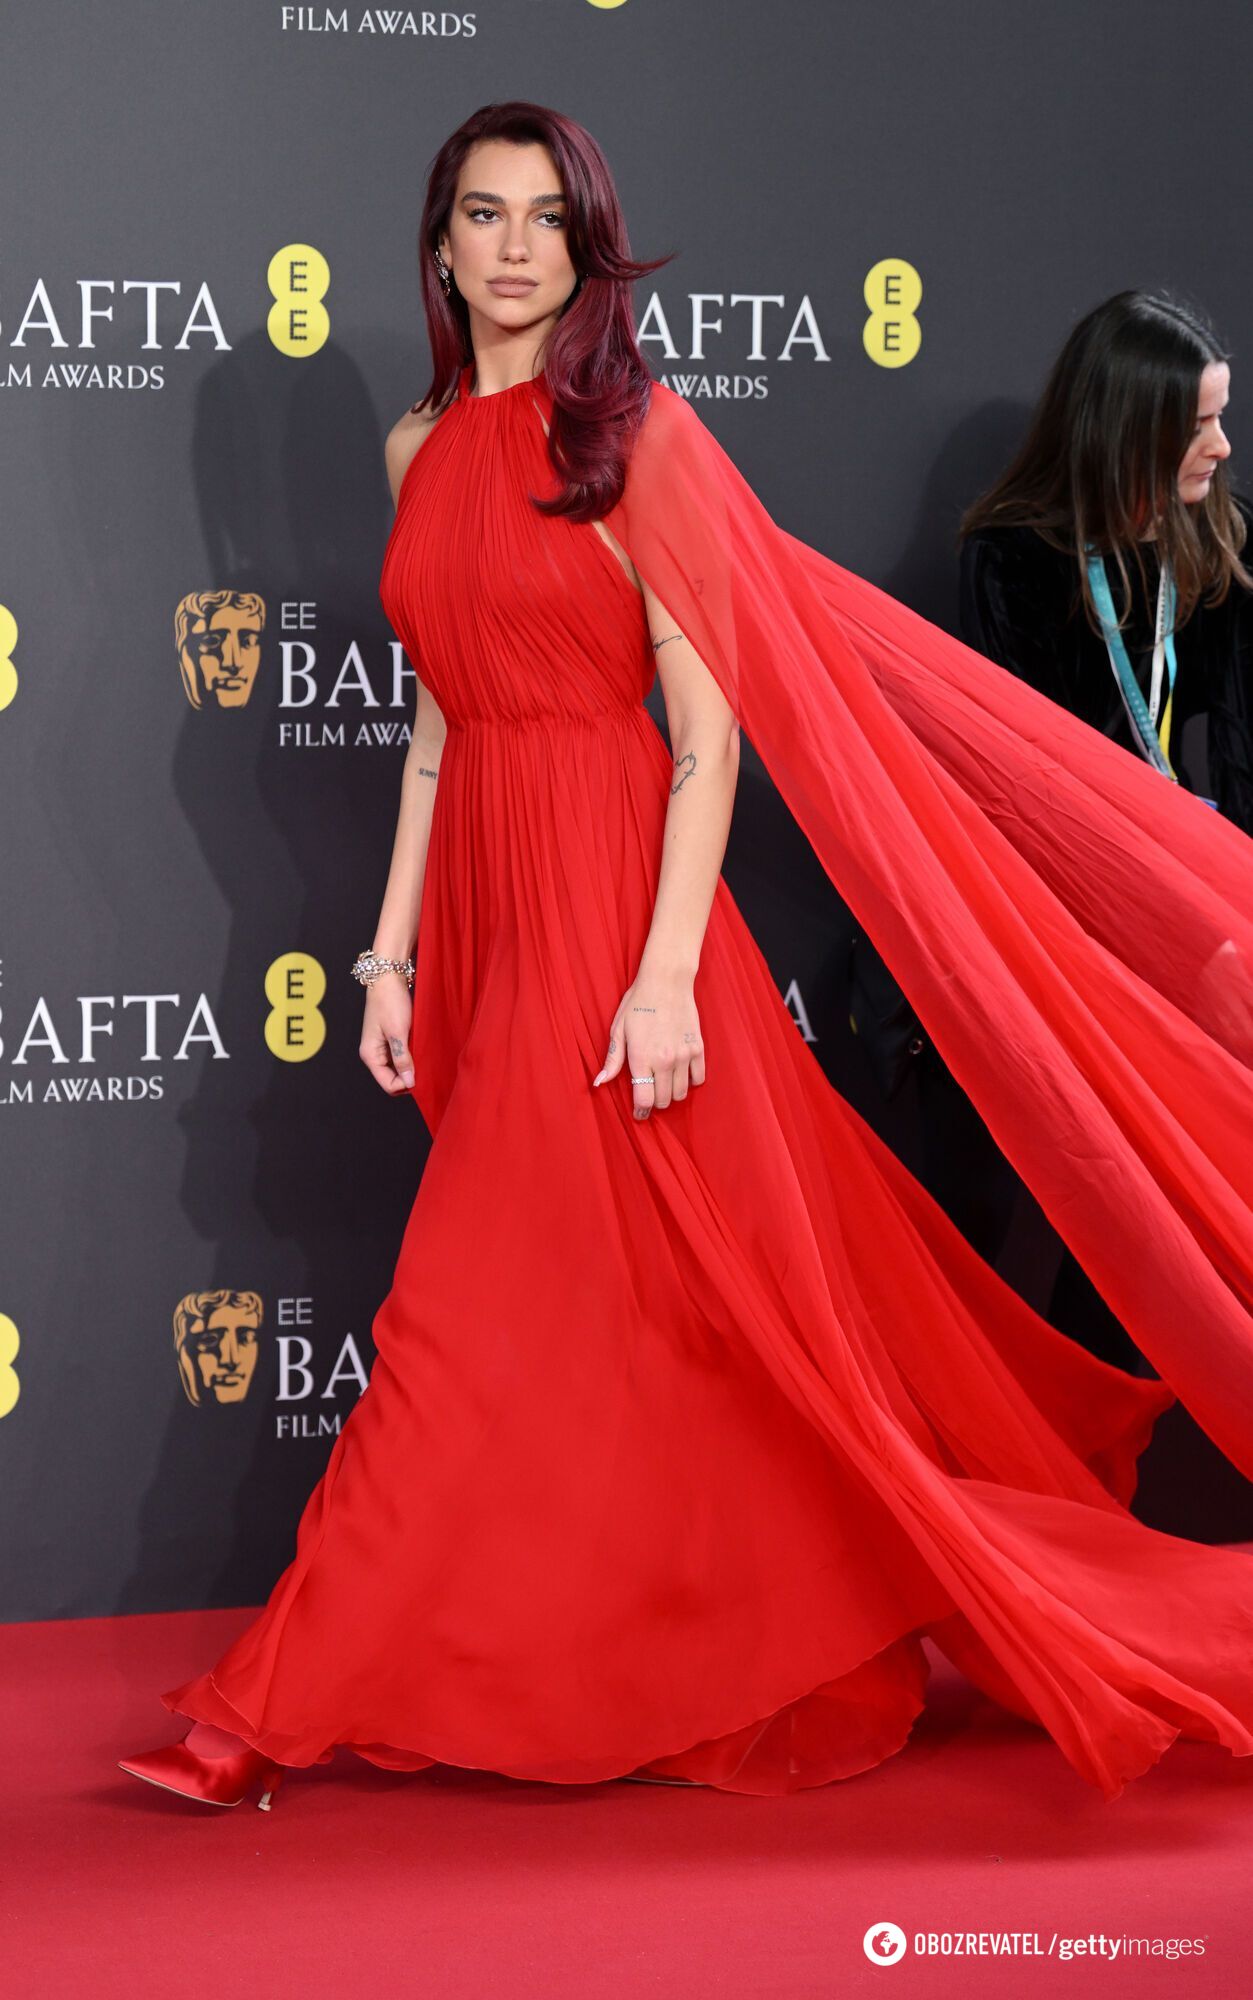 Cleopatra, a vampire and colorful beetles. 10 strange outfits that were named the most beautiful images of the BAFTAs